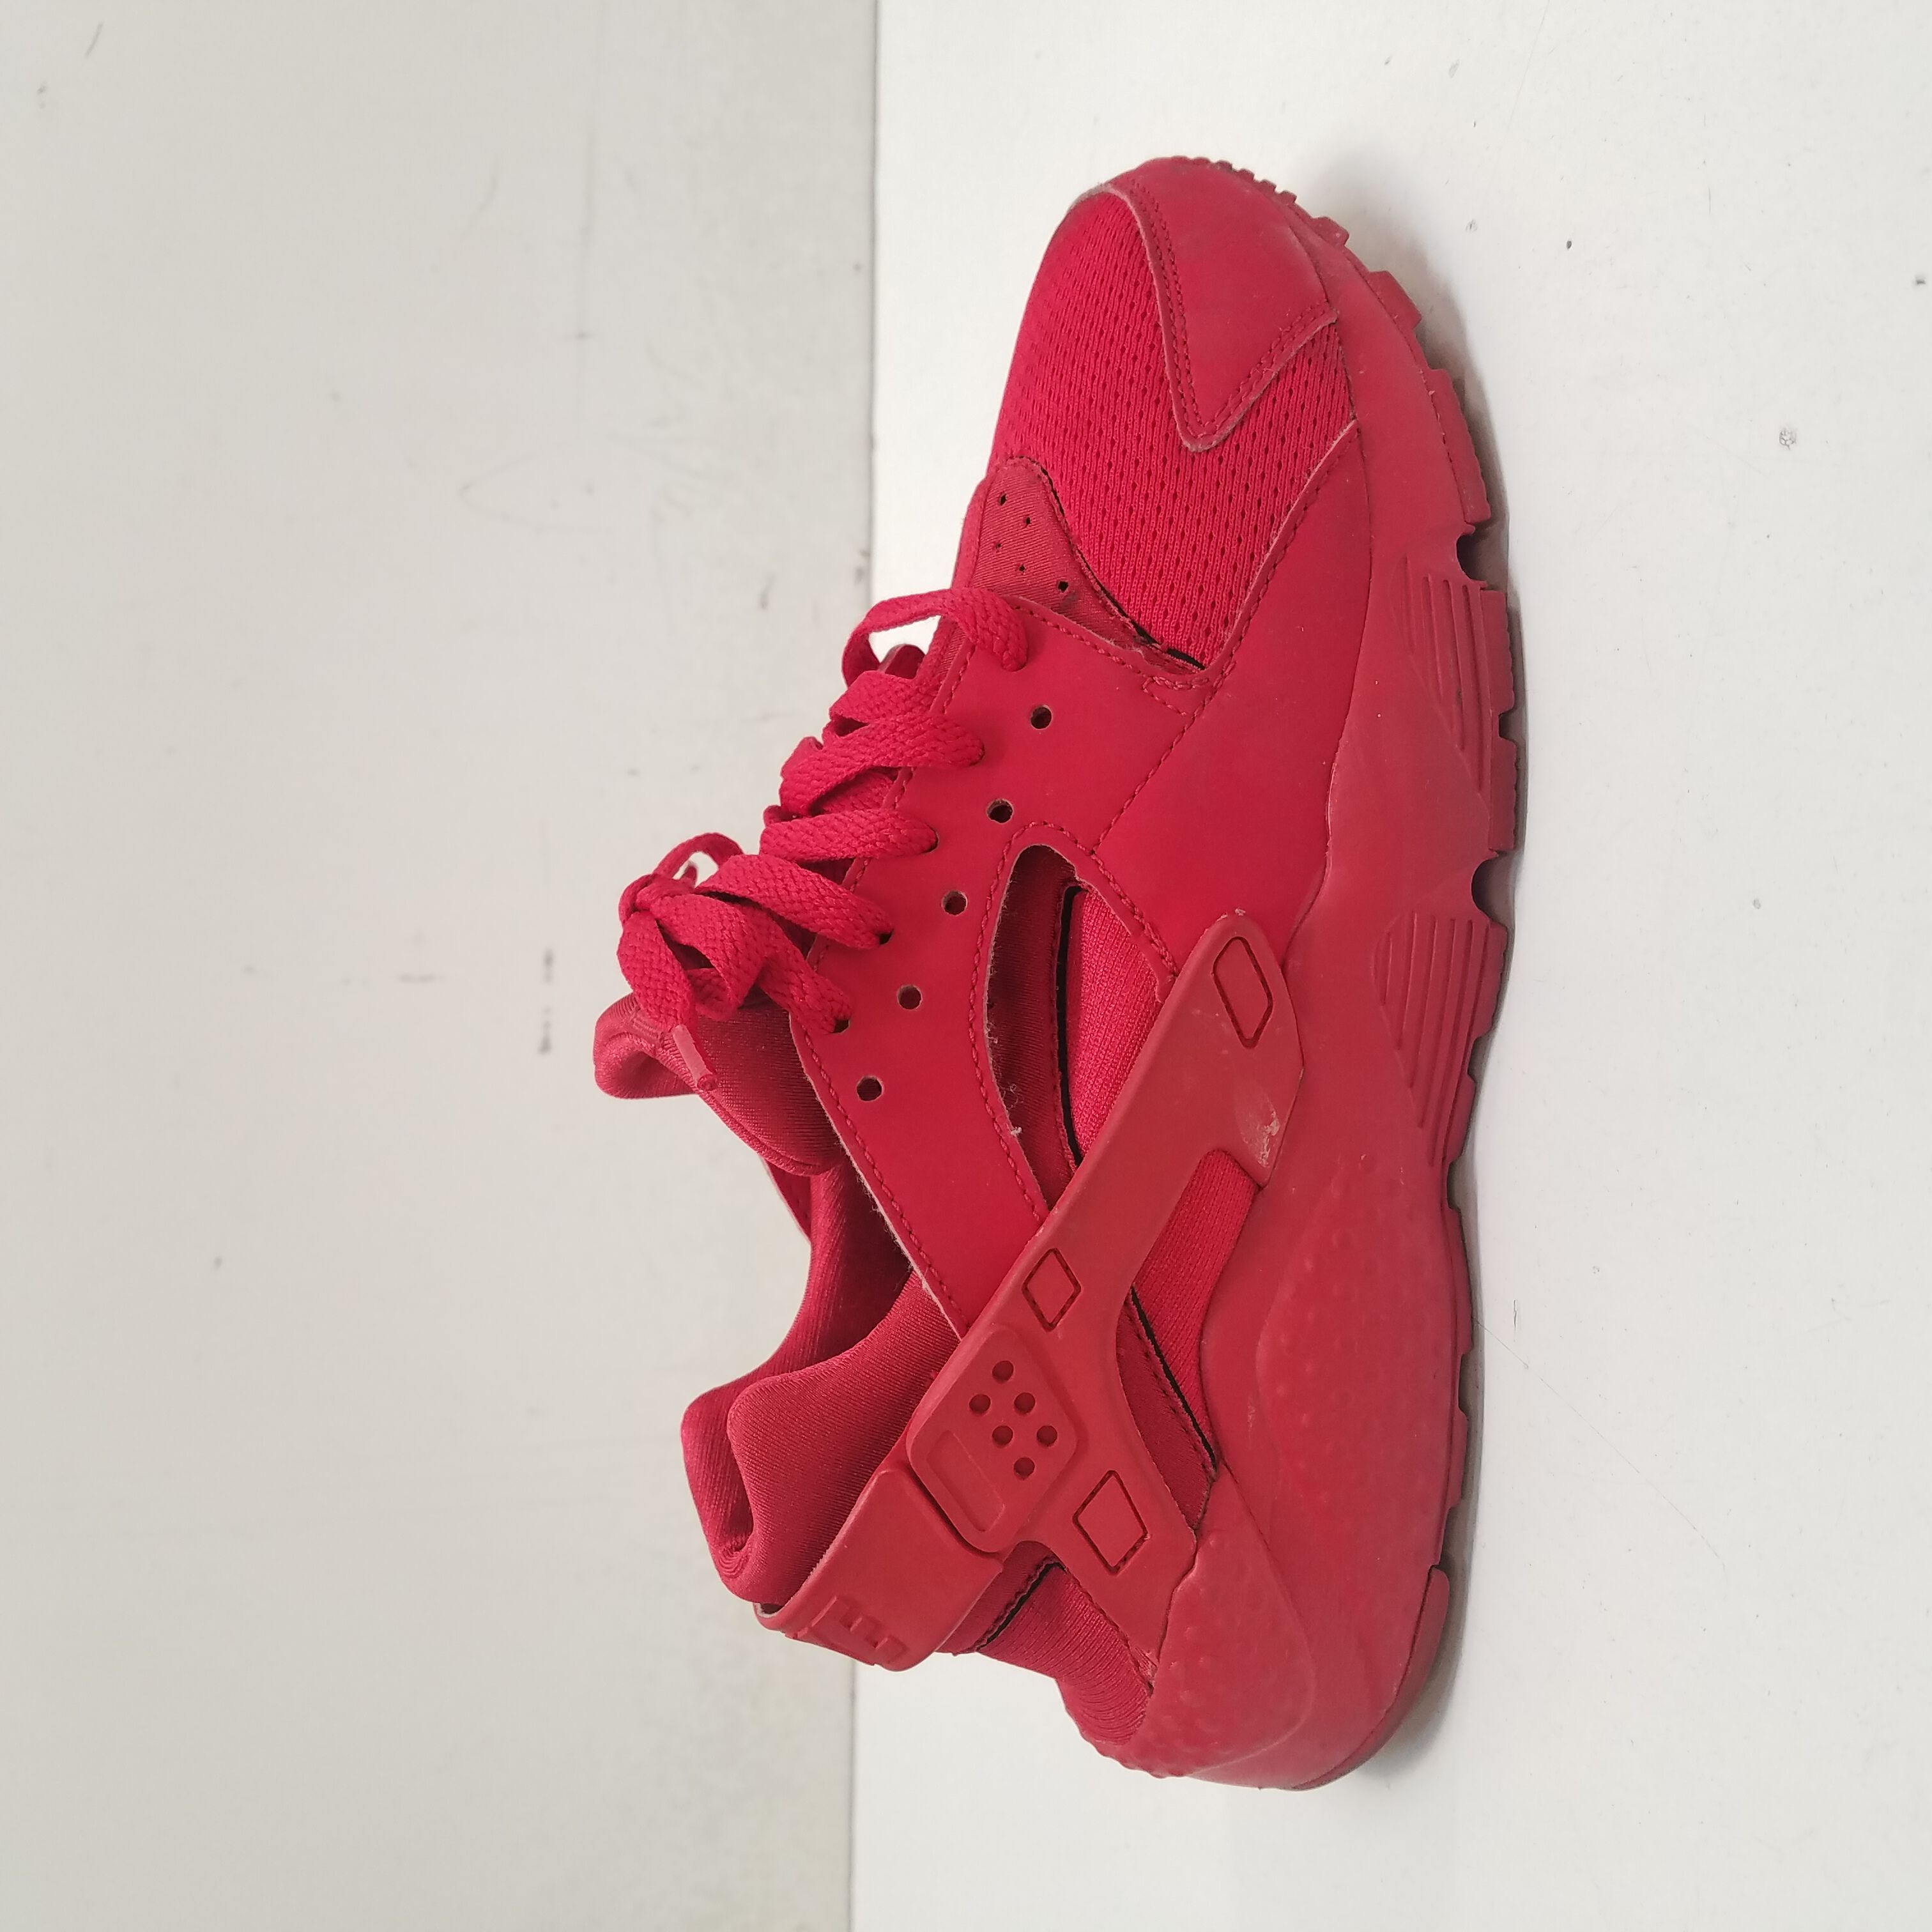 red huaraches women's size 7